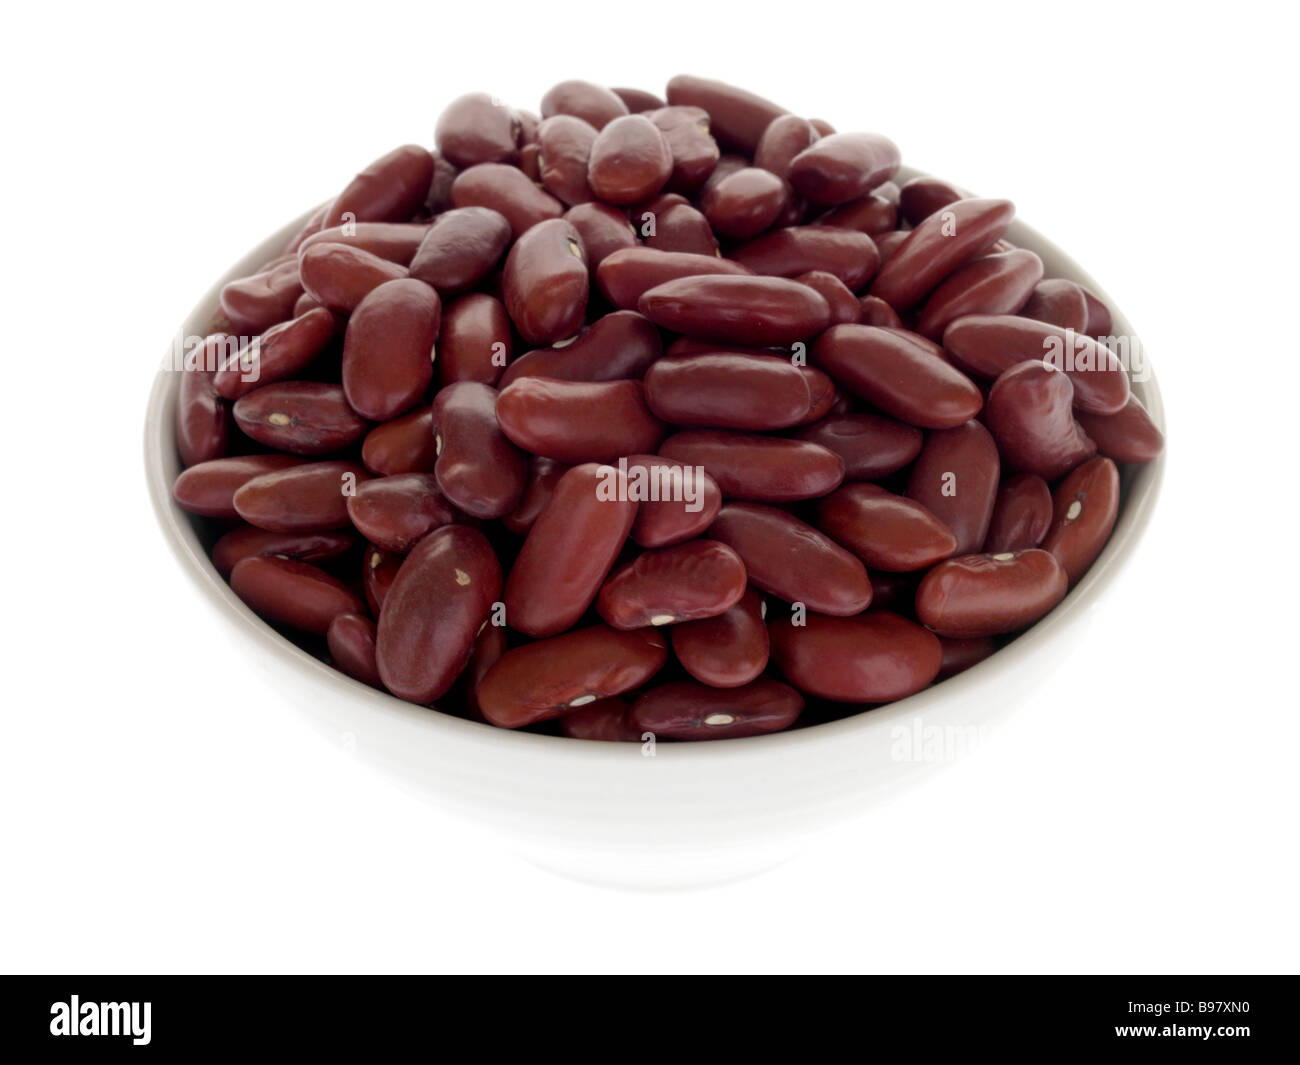 Dried Kidney Beans Stock Photo